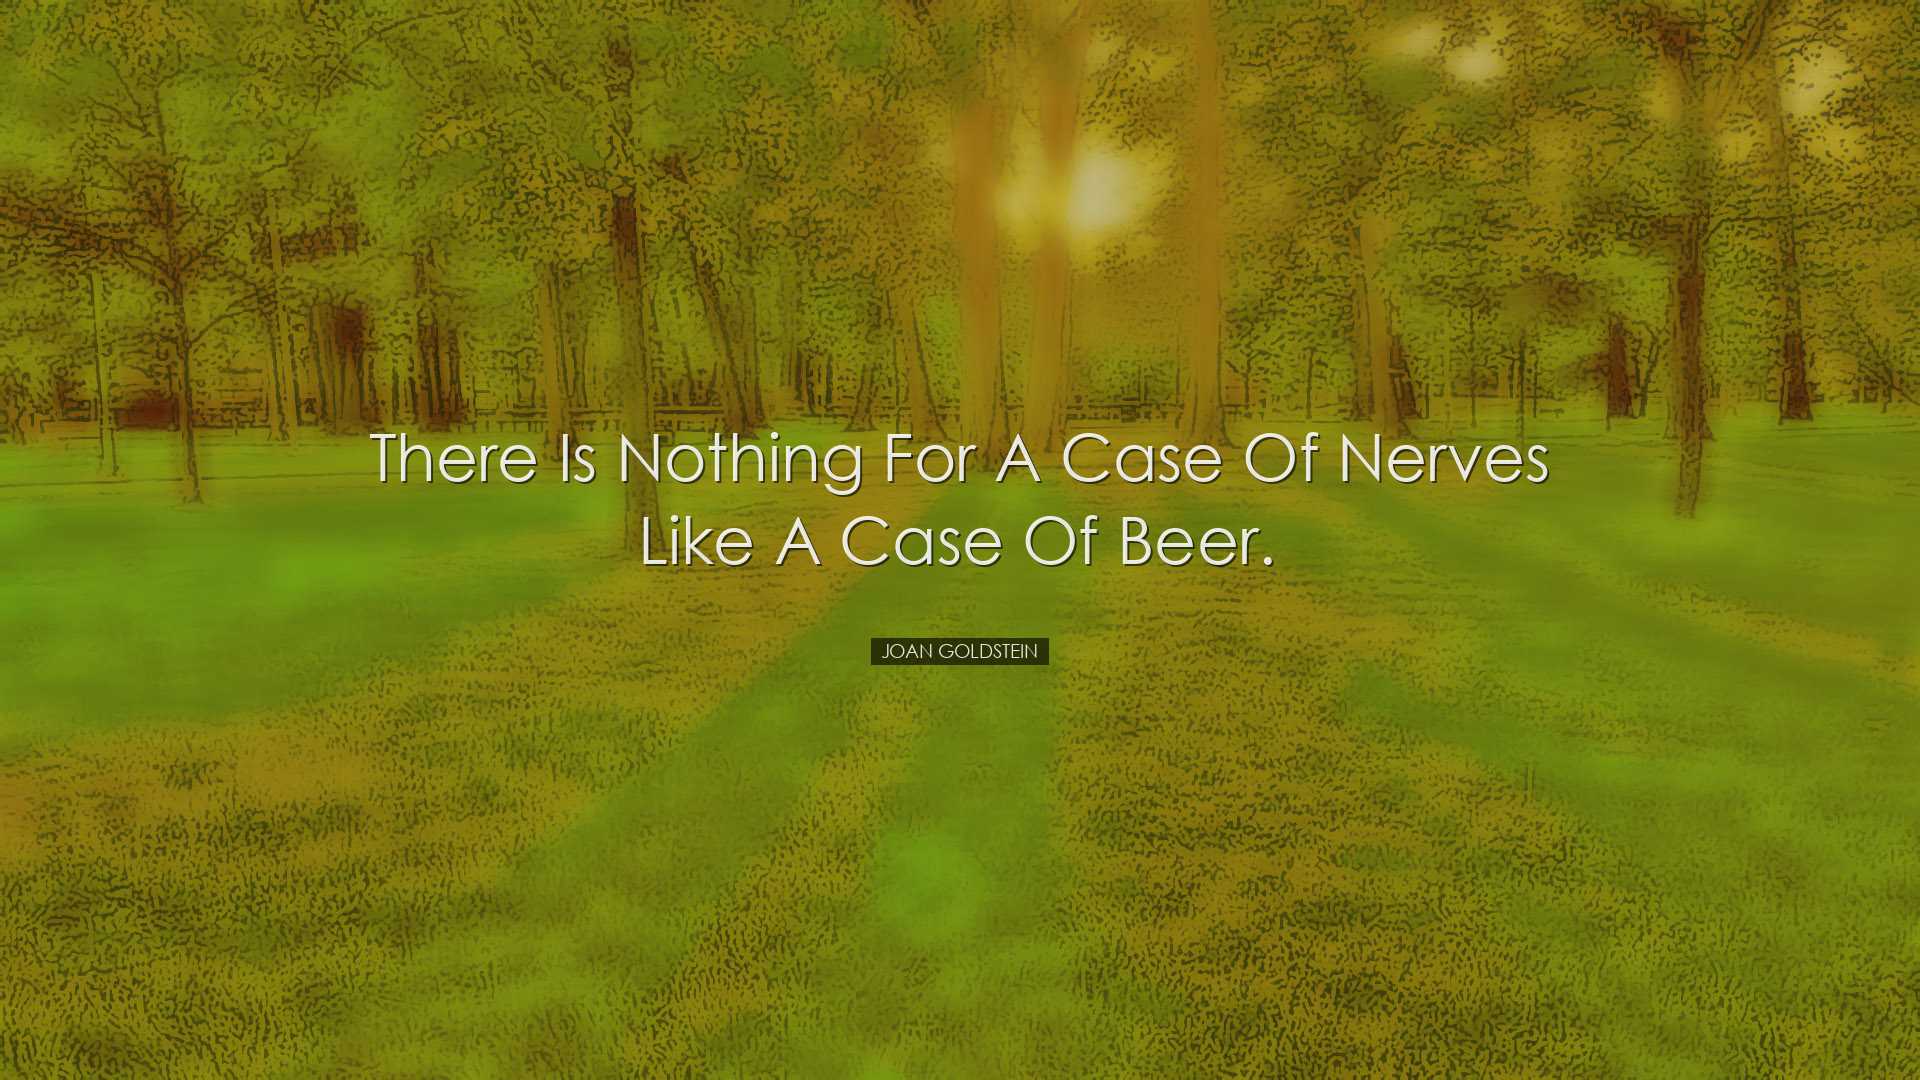 There is nothing for a case of nerves like a case of beer. - Joan